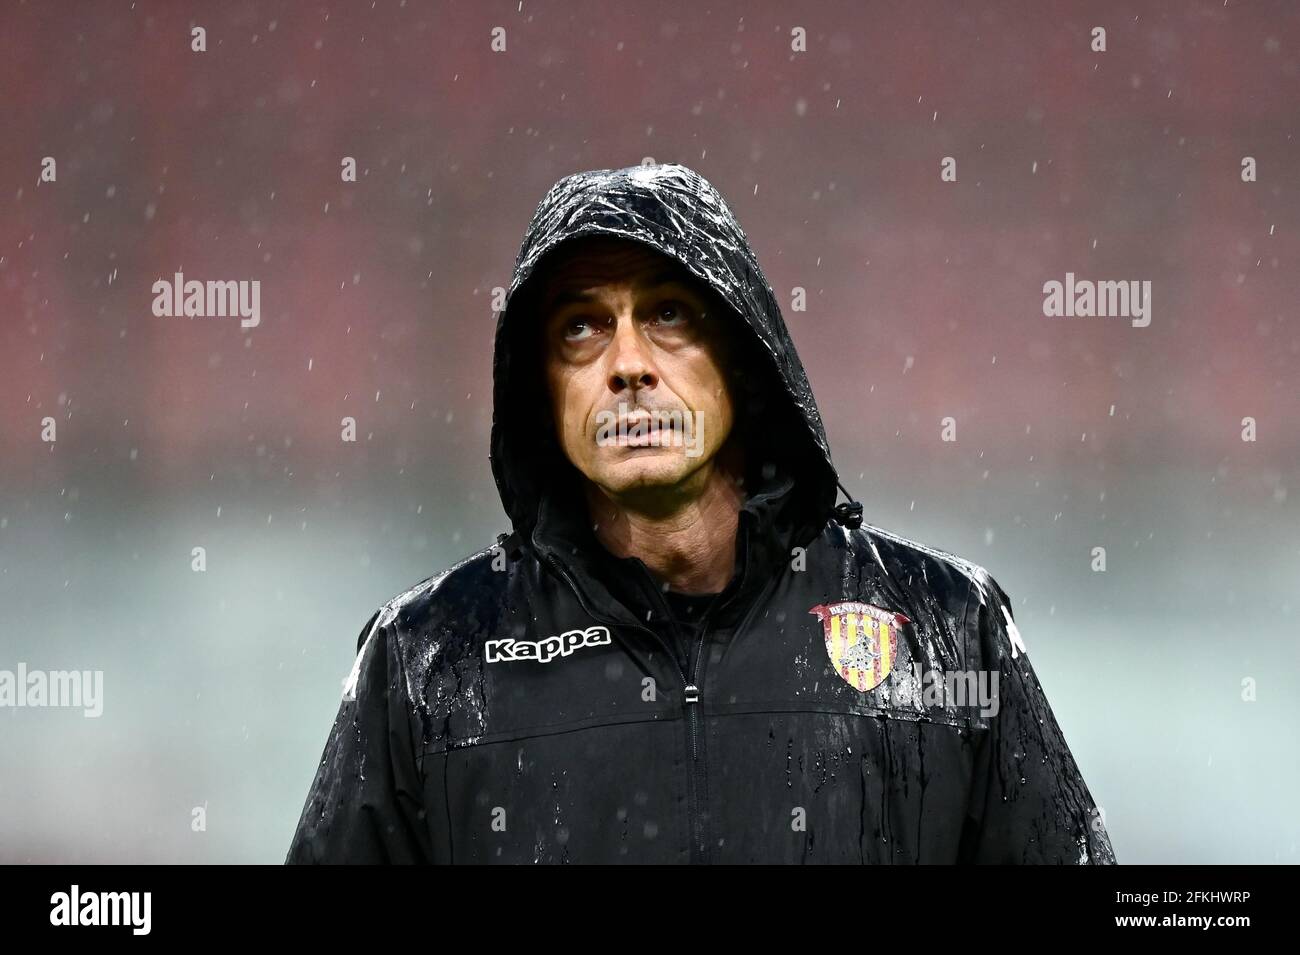 Milan, Italy. 01 May 2021. Filippo Inzaghi, head coach of Benevento Calcio, looks on prior to the Serie A football match between AC Milan and Benevento Calcio. AC Milan won 2-0 over Benevento Calcio. Credit: Nicolò Campo/Alamy Live News Stock Photo